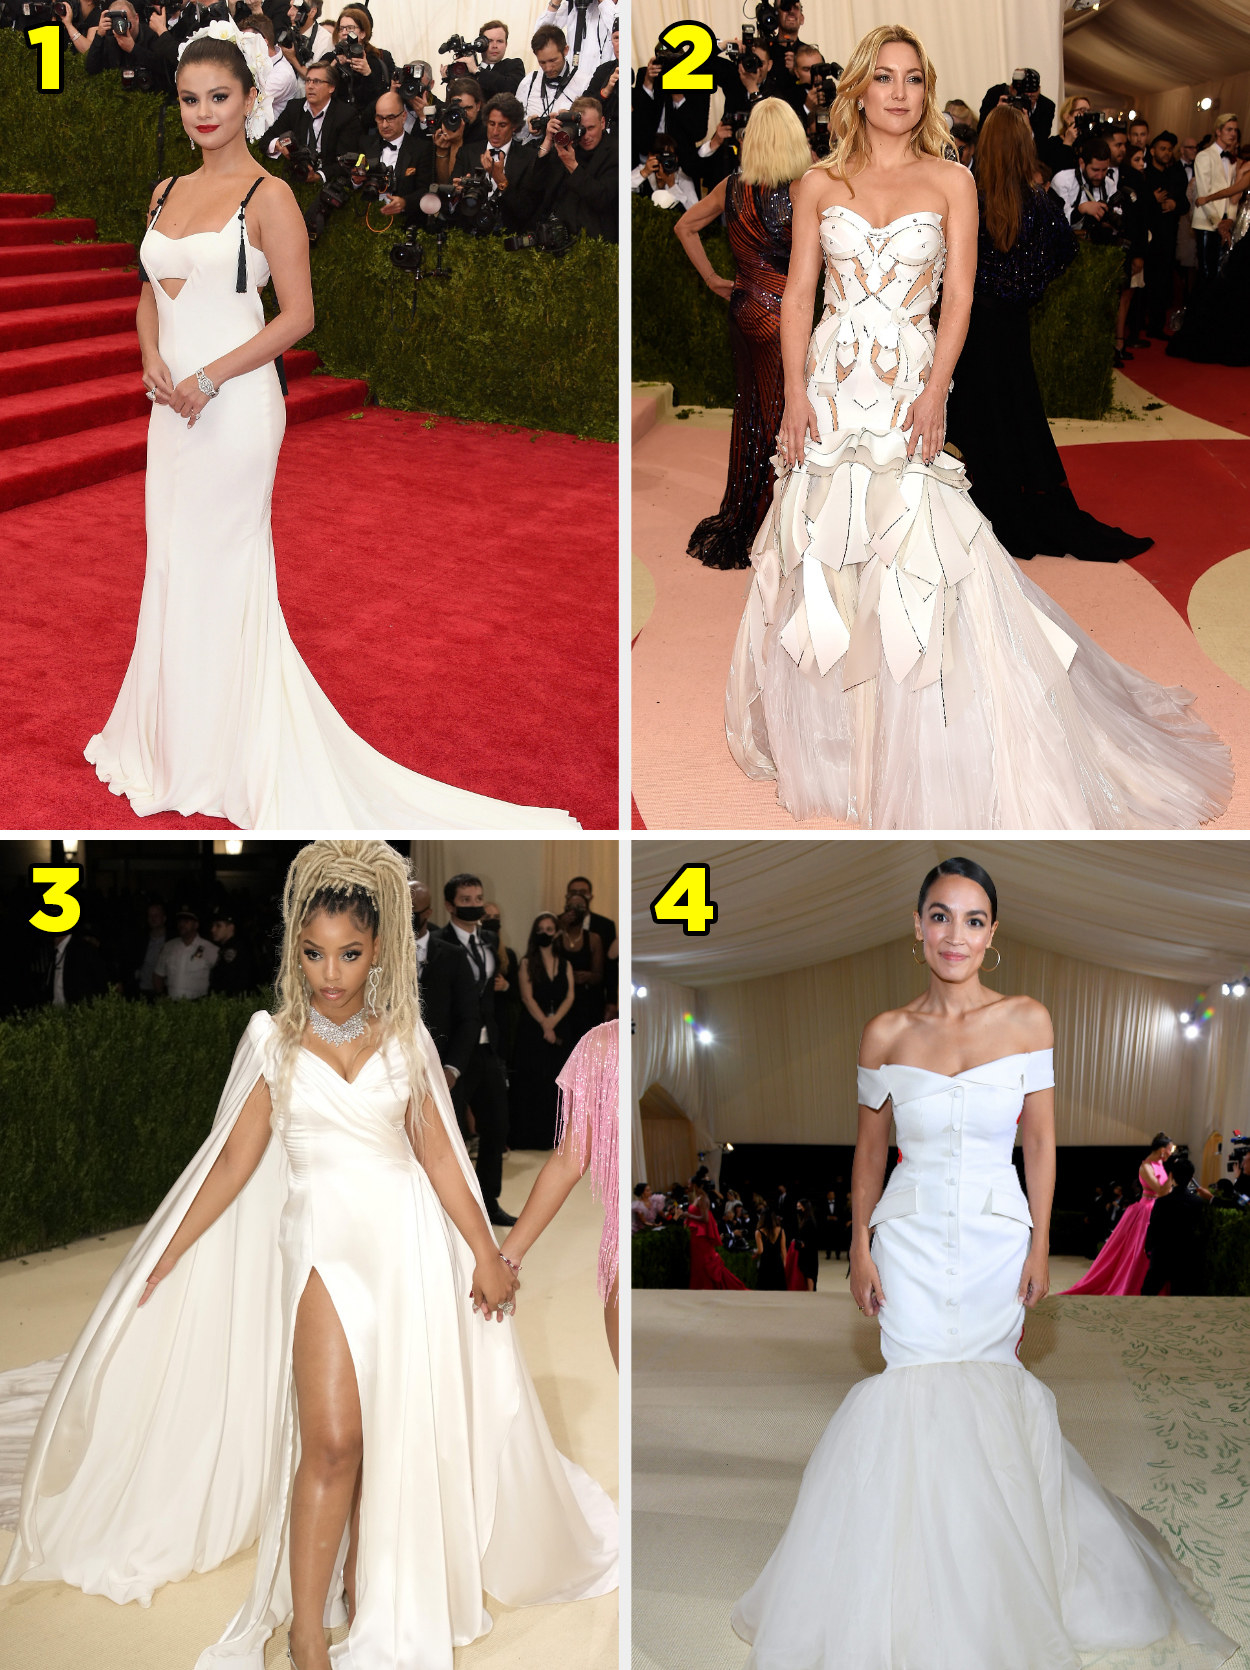 1. a sleeveless dress with a cutout beneath the bust. 2 A strapless gown with a geometric pattern. 3. A sleeveless gown with a cape and thigh slit. 4. An off shoulder gown with buttons down the front and &quot;Tax the Rich&quot; written on the back.